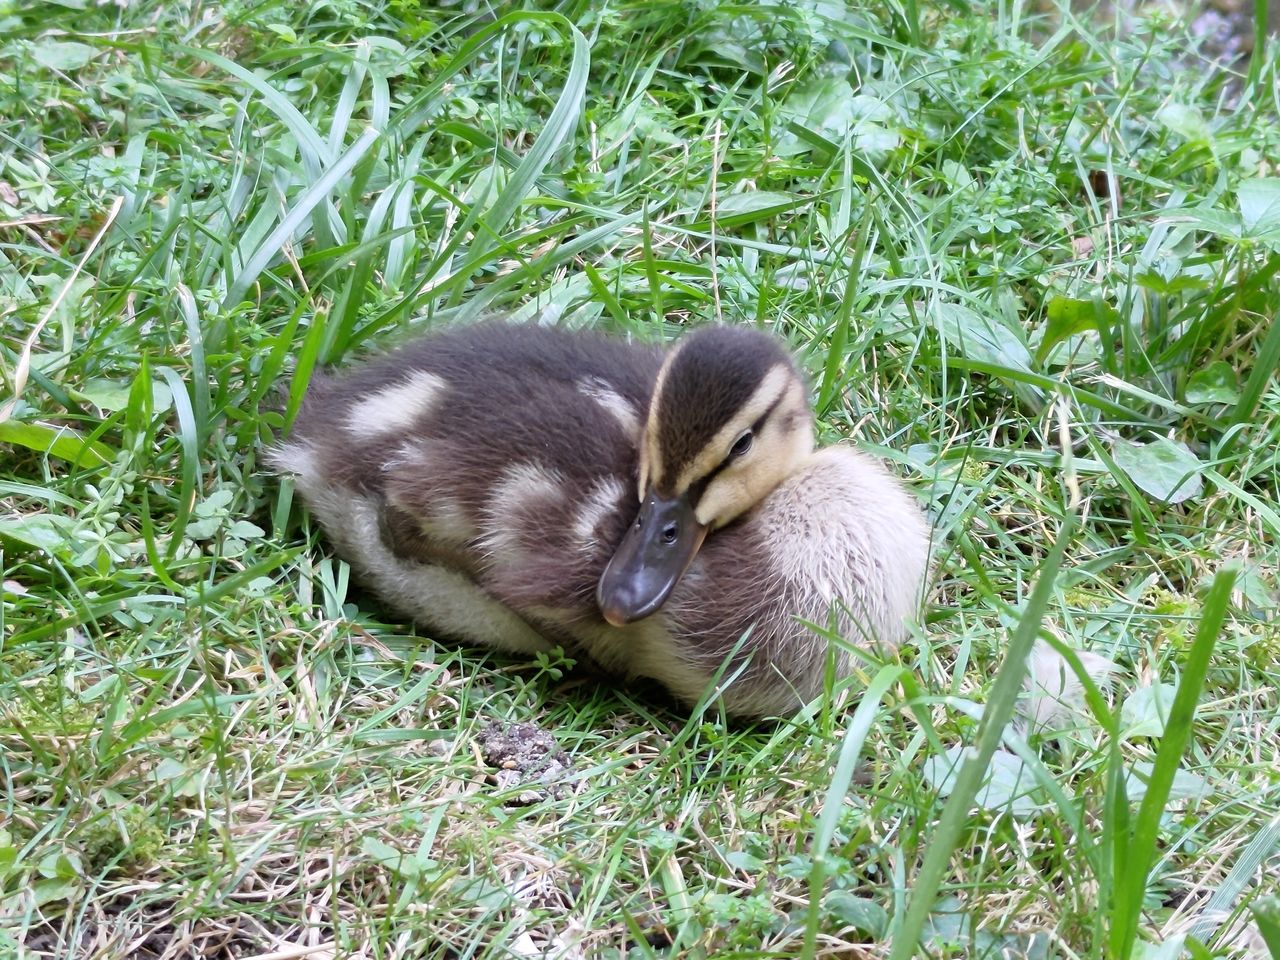 grass, animal themes, animal, plant, bird, water bird, duck, animal wildlife, wildlife, ducks, geese and swans, nature, green, young animal, no people, one animal, high angle view, land, beak, young bird, field, day, duckling, outdoors, growth, relaxation, mammal